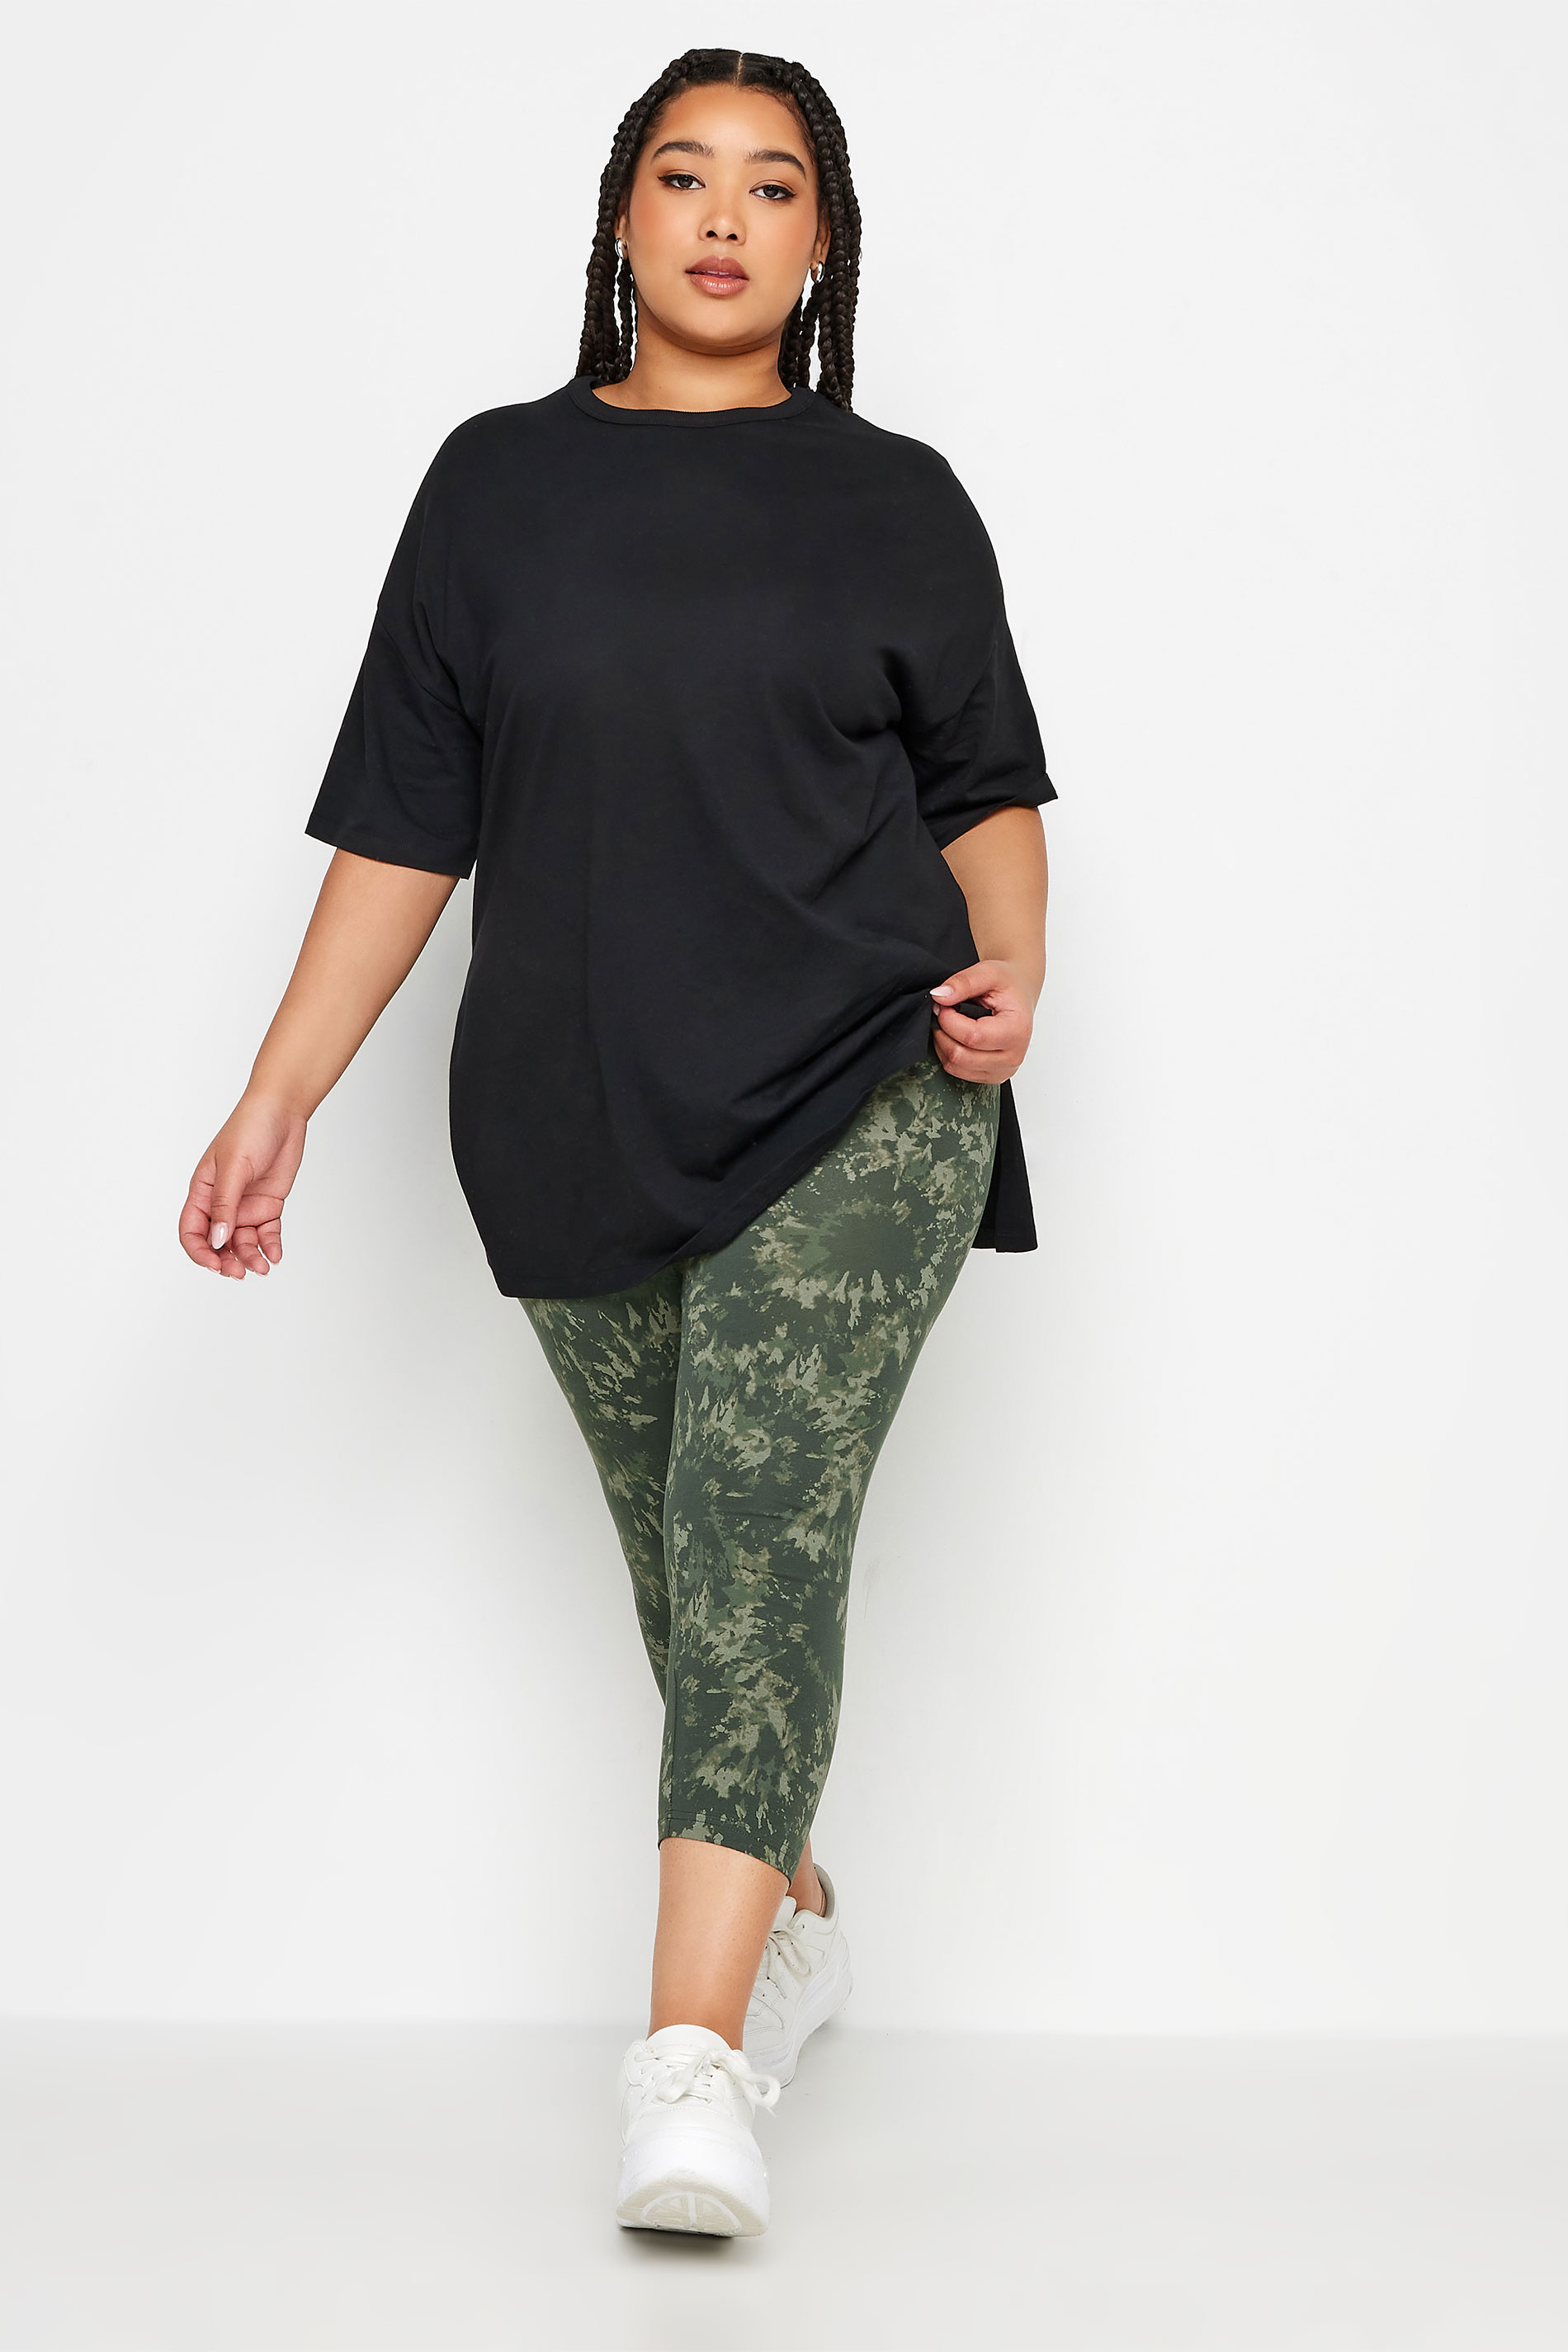 YOURS Plus Size 2 PACK Black & Khaki Green Tie Dye Cropped Leggings | Yours Clothing 3